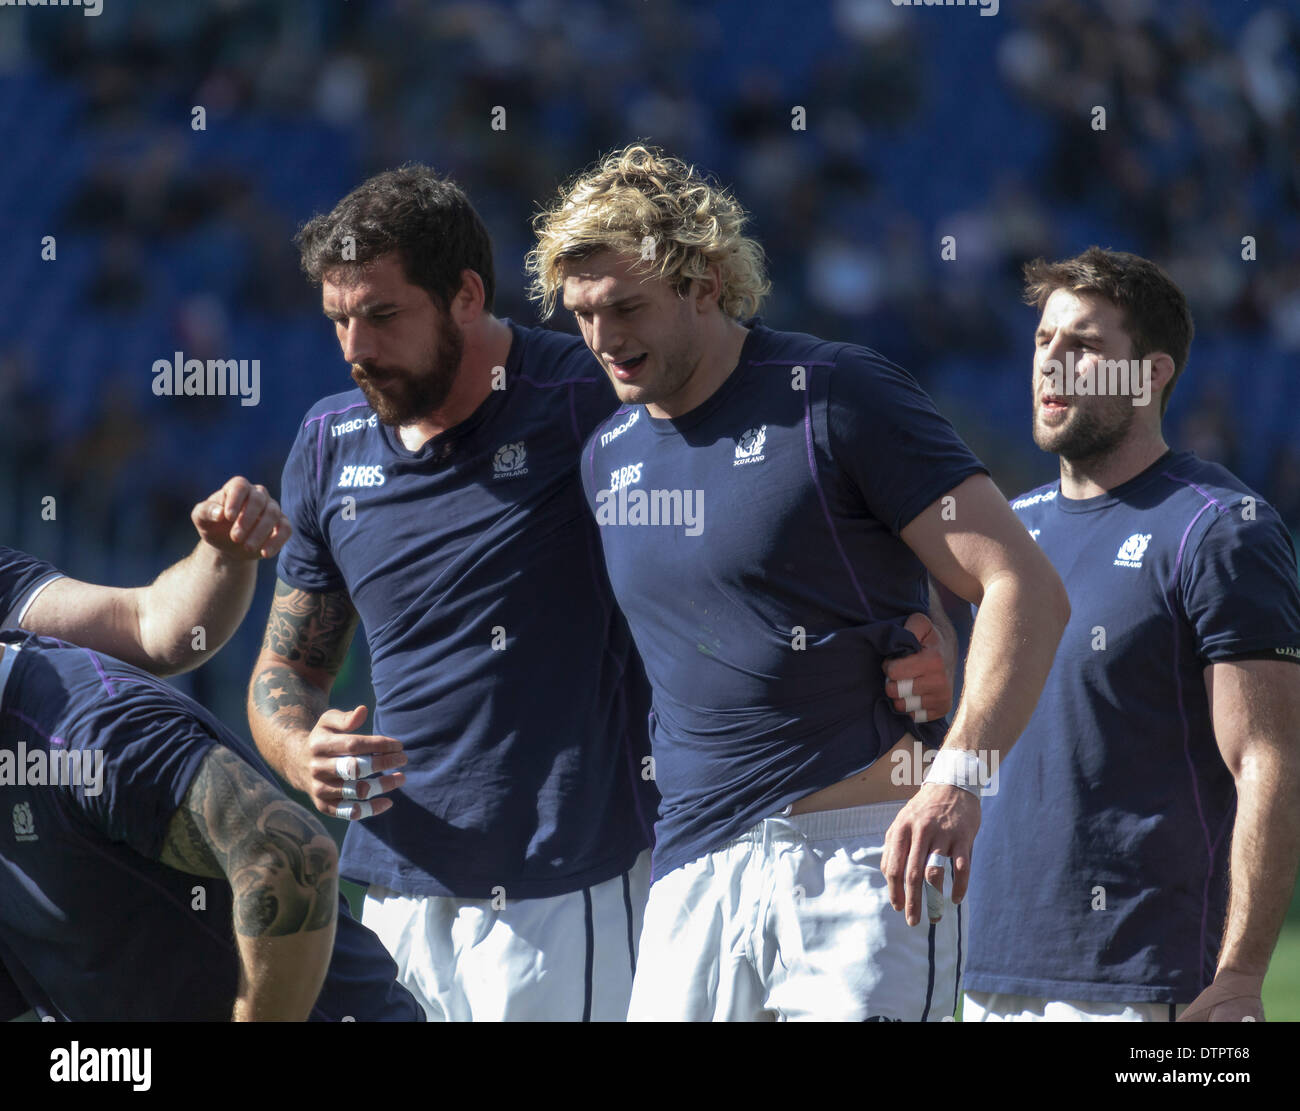 Rome, Italy. 22nd Feb, 2014. 6 Nations rugby Italy vs Scotland. Scotland beat Italy by 21 points to 20 with a Duncan Weir drop kick a minute before full time. Jim Hamilton, Richie Gray and Ryan Wilson exercising in the scrum before kick-off. Credit:  Stephen Bisgrove/Alamy Live News Stock Photo